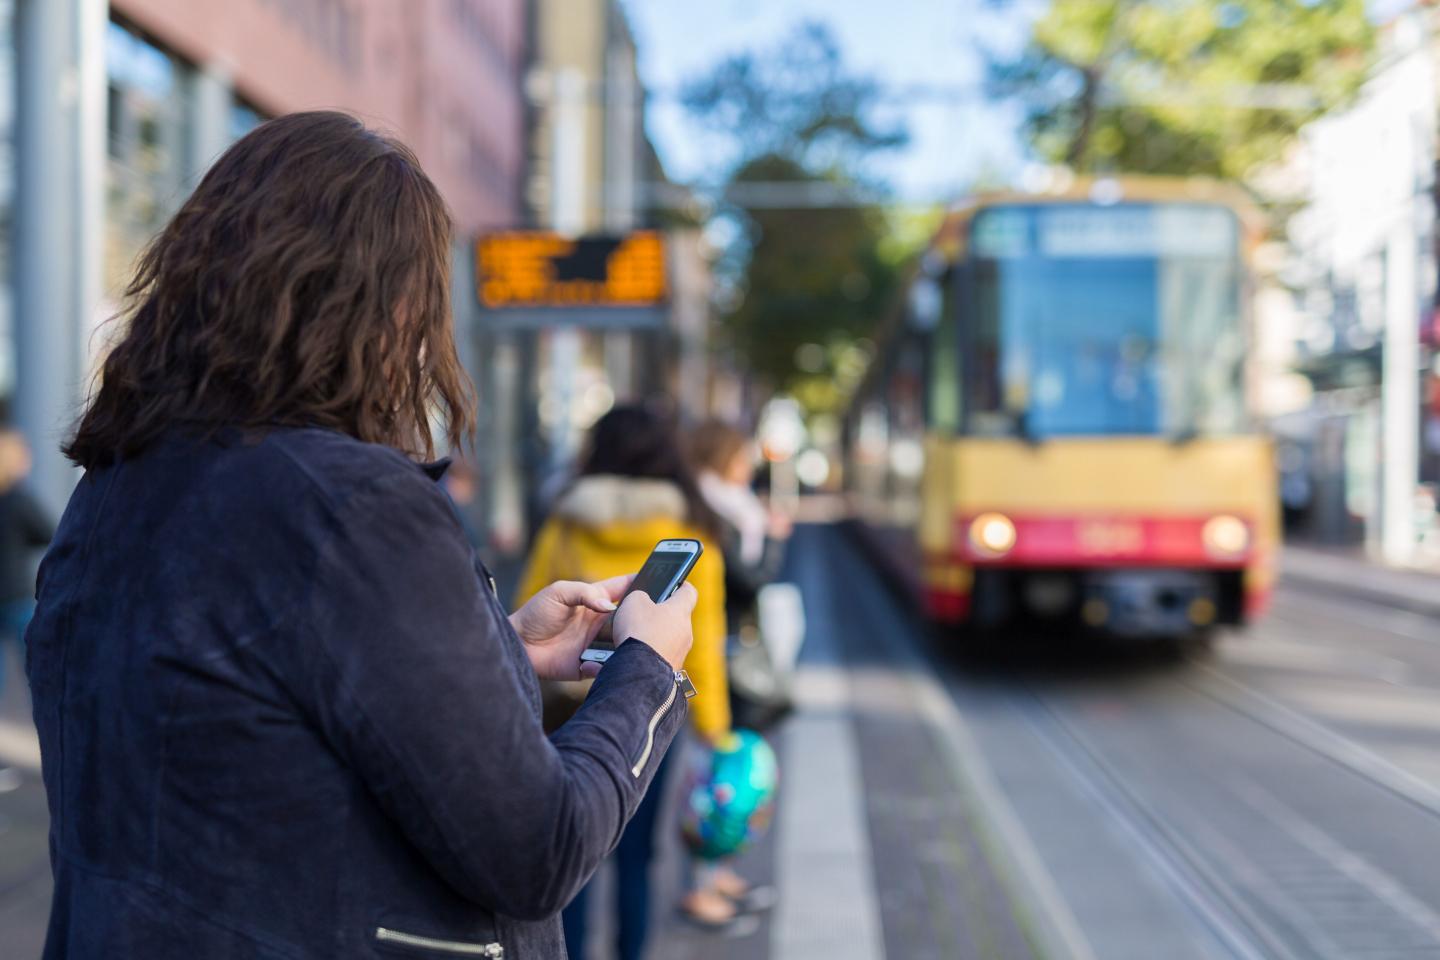 Apps Help Travelers in Planning Public Transport Routes, but Often Fail to Display the Best Route